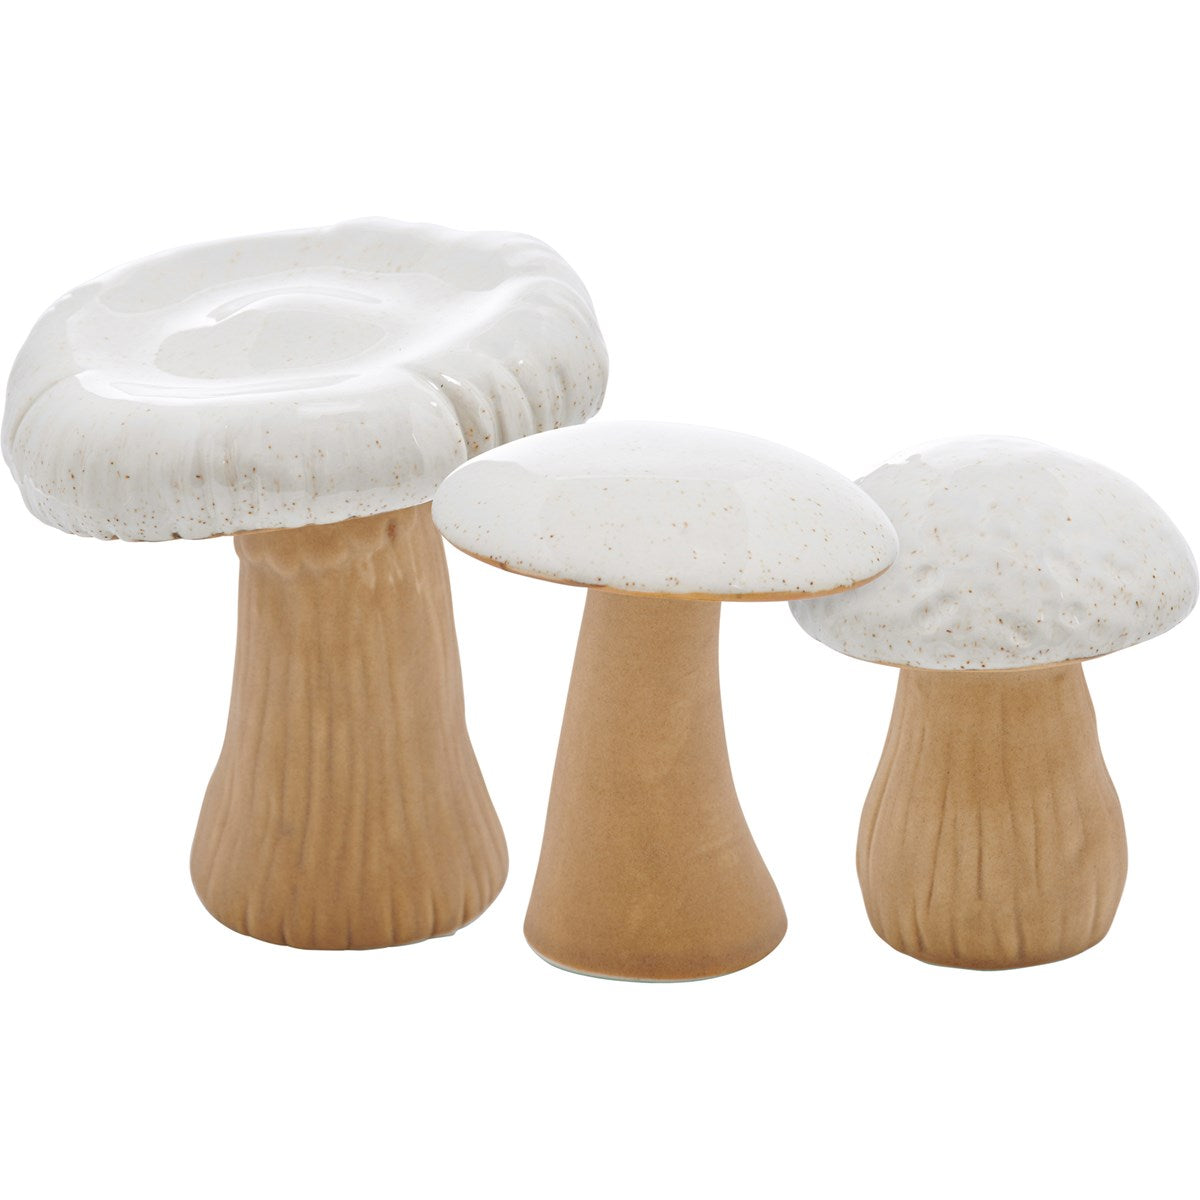 3 sizes of mushrooms on a white background.